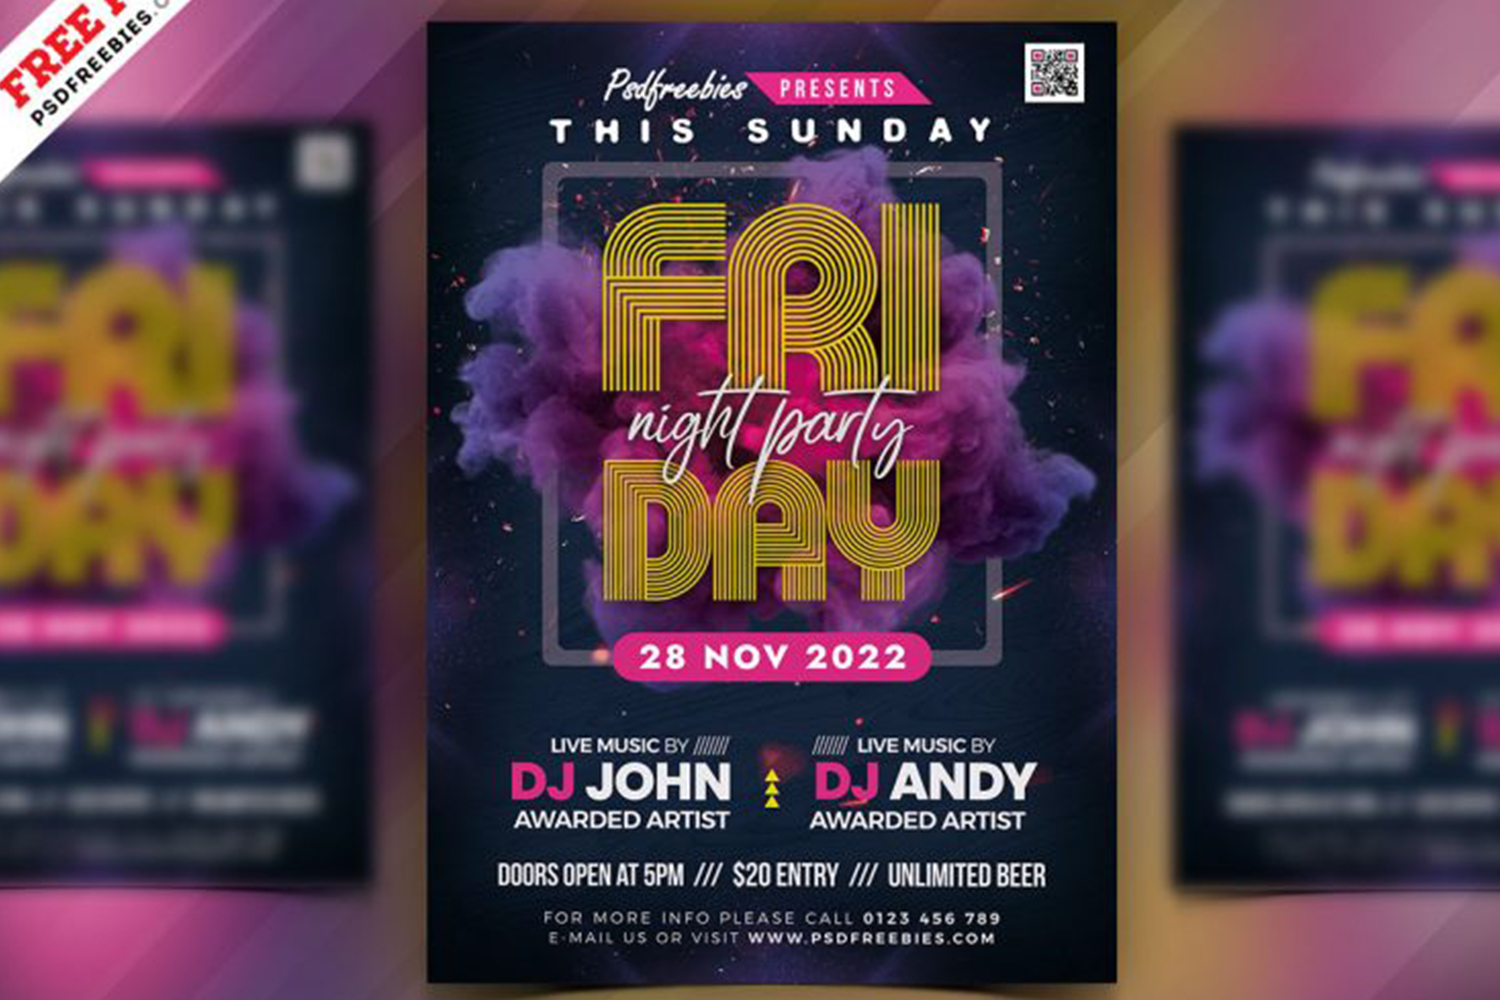 Friday Night Club Party Flyer PSD Free Download